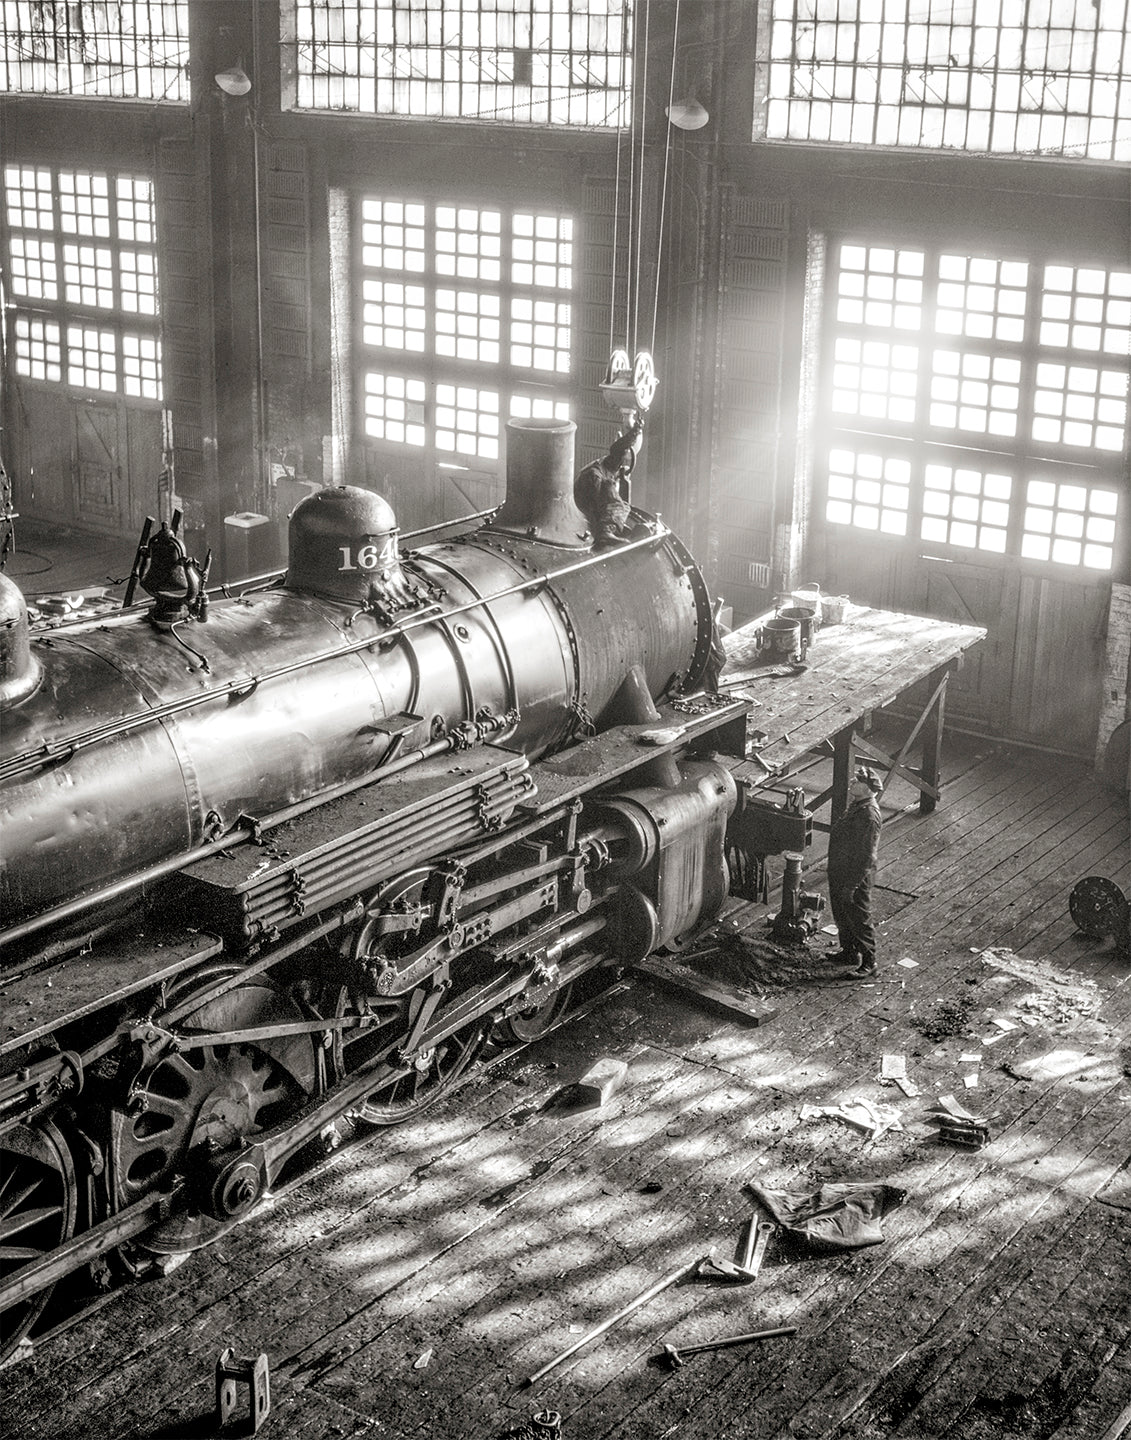 Train, at Chicago's 40th Street Railroad Shops, Chicago, Ill. 1942 Historical Pix